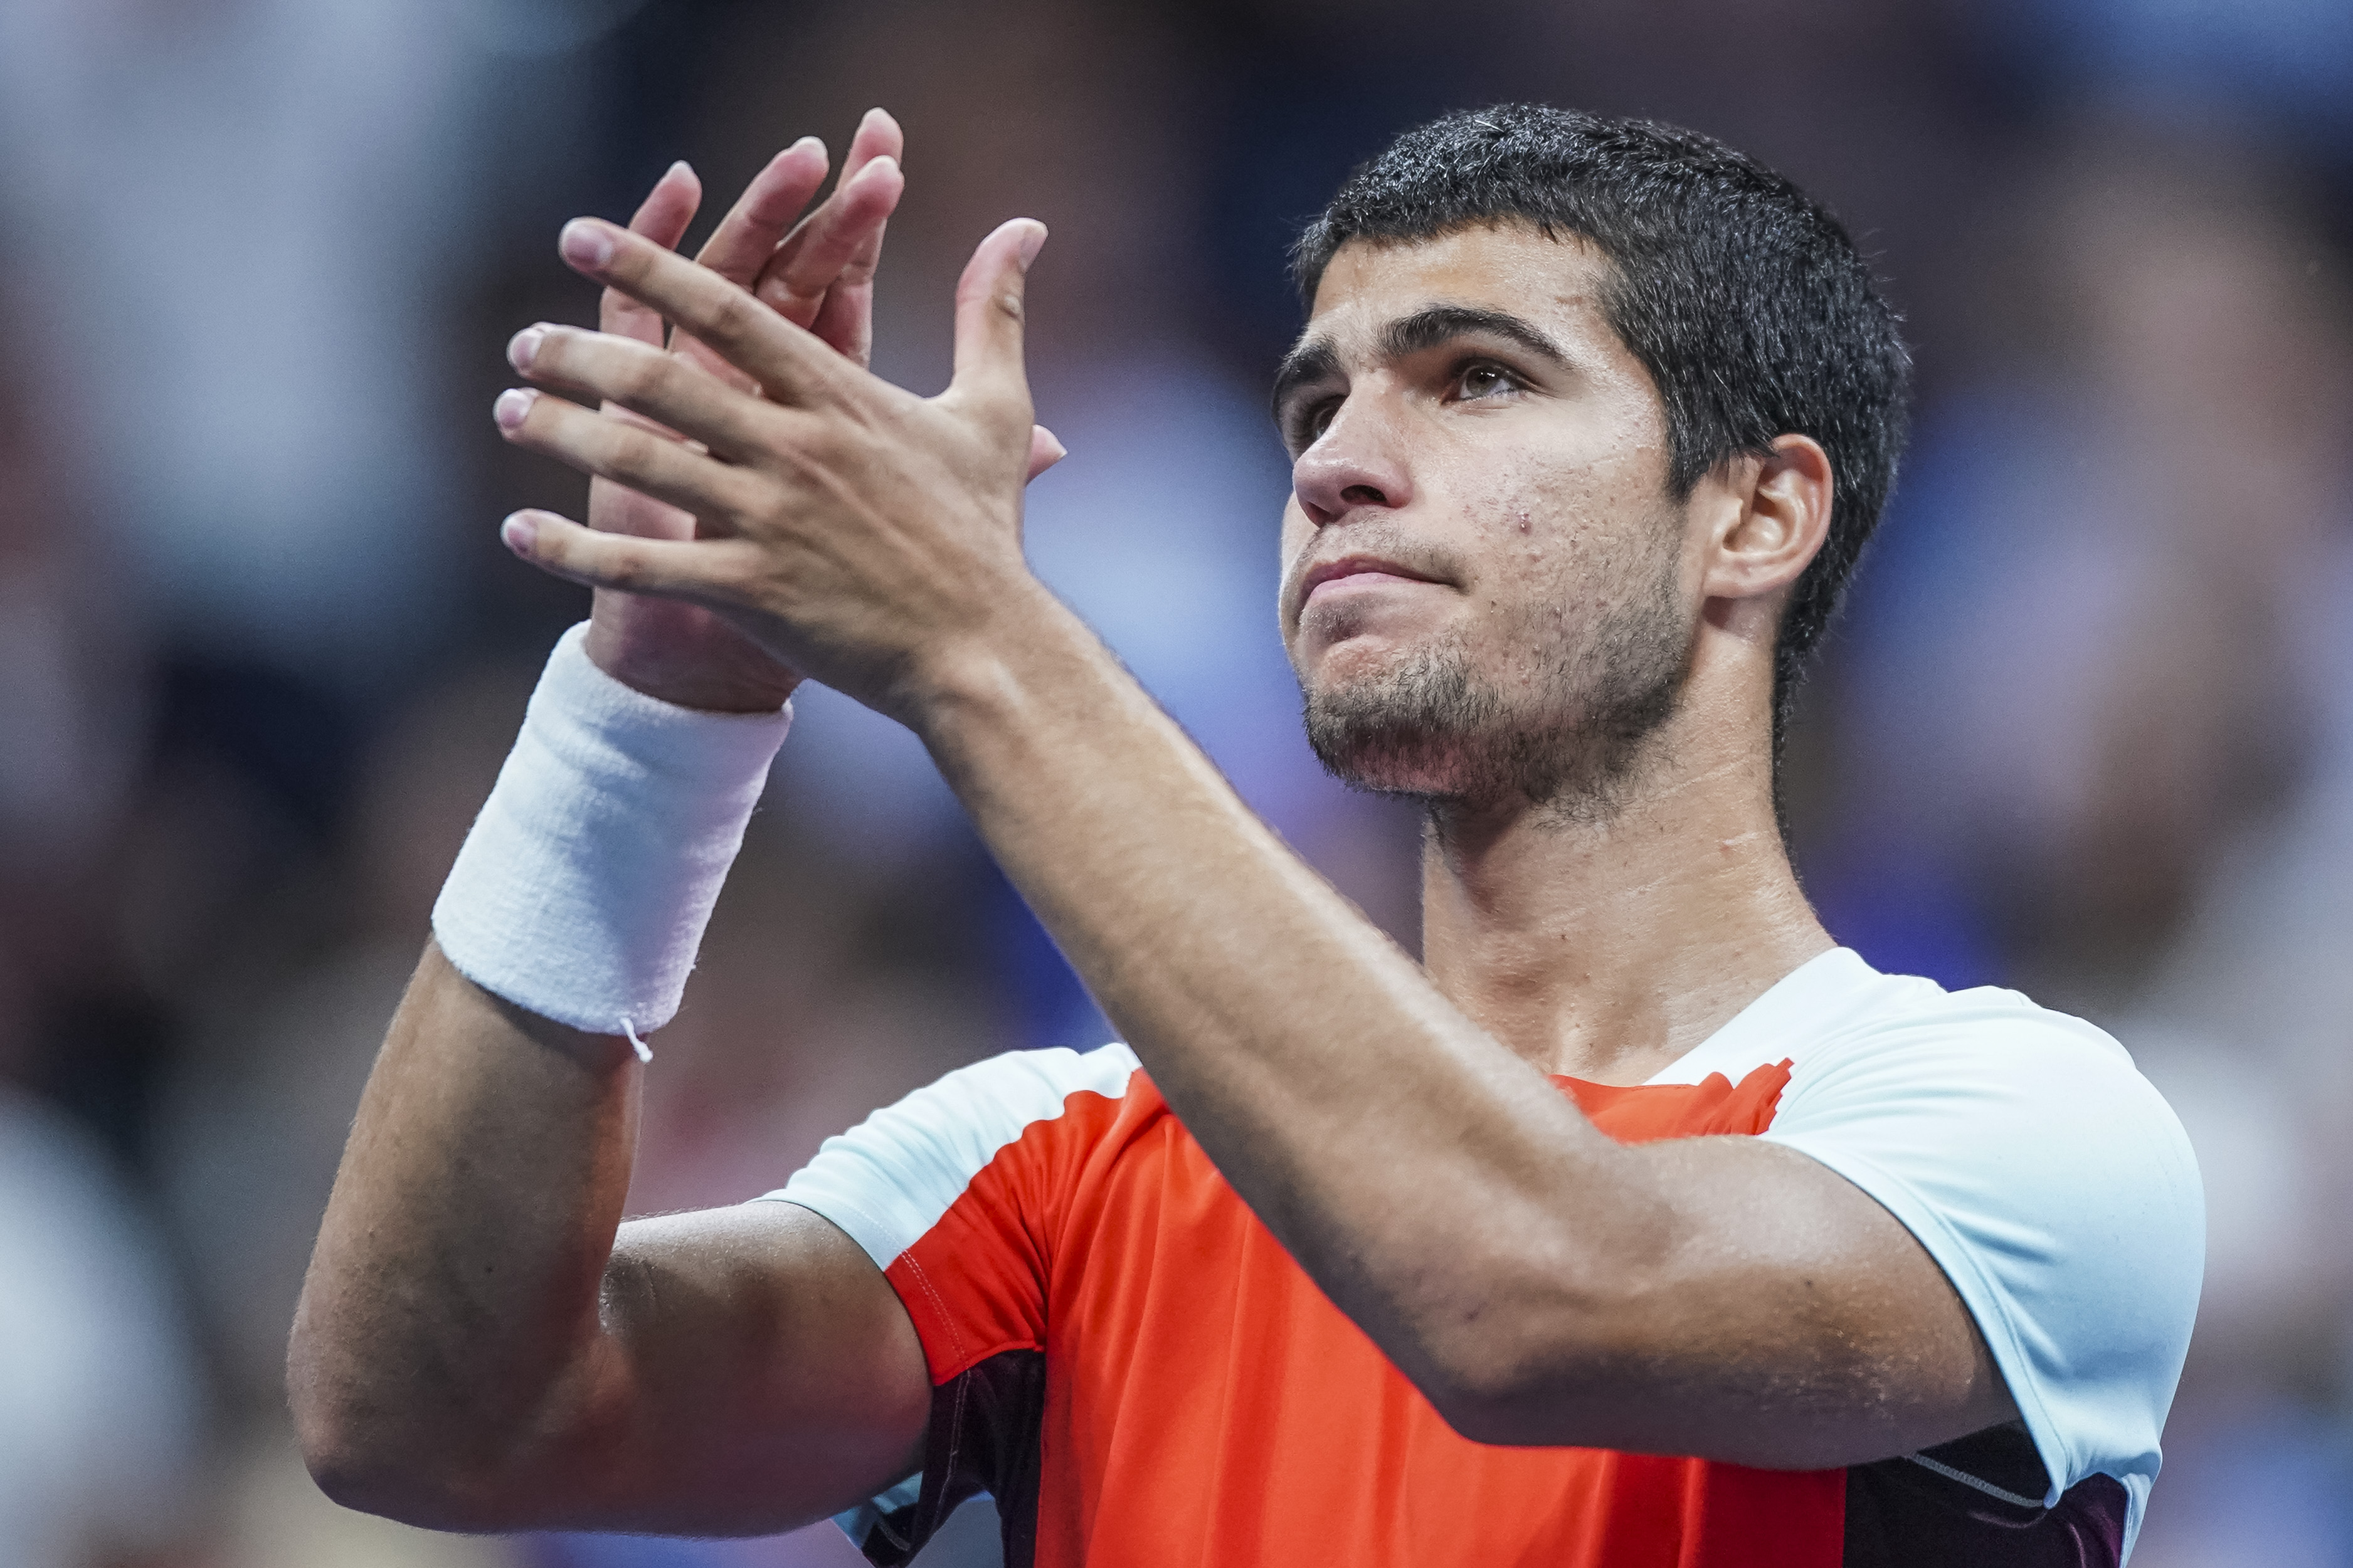 Carlos Alcaraz of Spain reacts after defeating Frances Tiafoe of the United States during their Men's Singles Semifinal match of the 2022 US Open at the USTA Billie Jean King National Tennis Center on September 9, 2022 in  New York City. (Photo by Eduardo MunozAlvarez—VIEWpress)